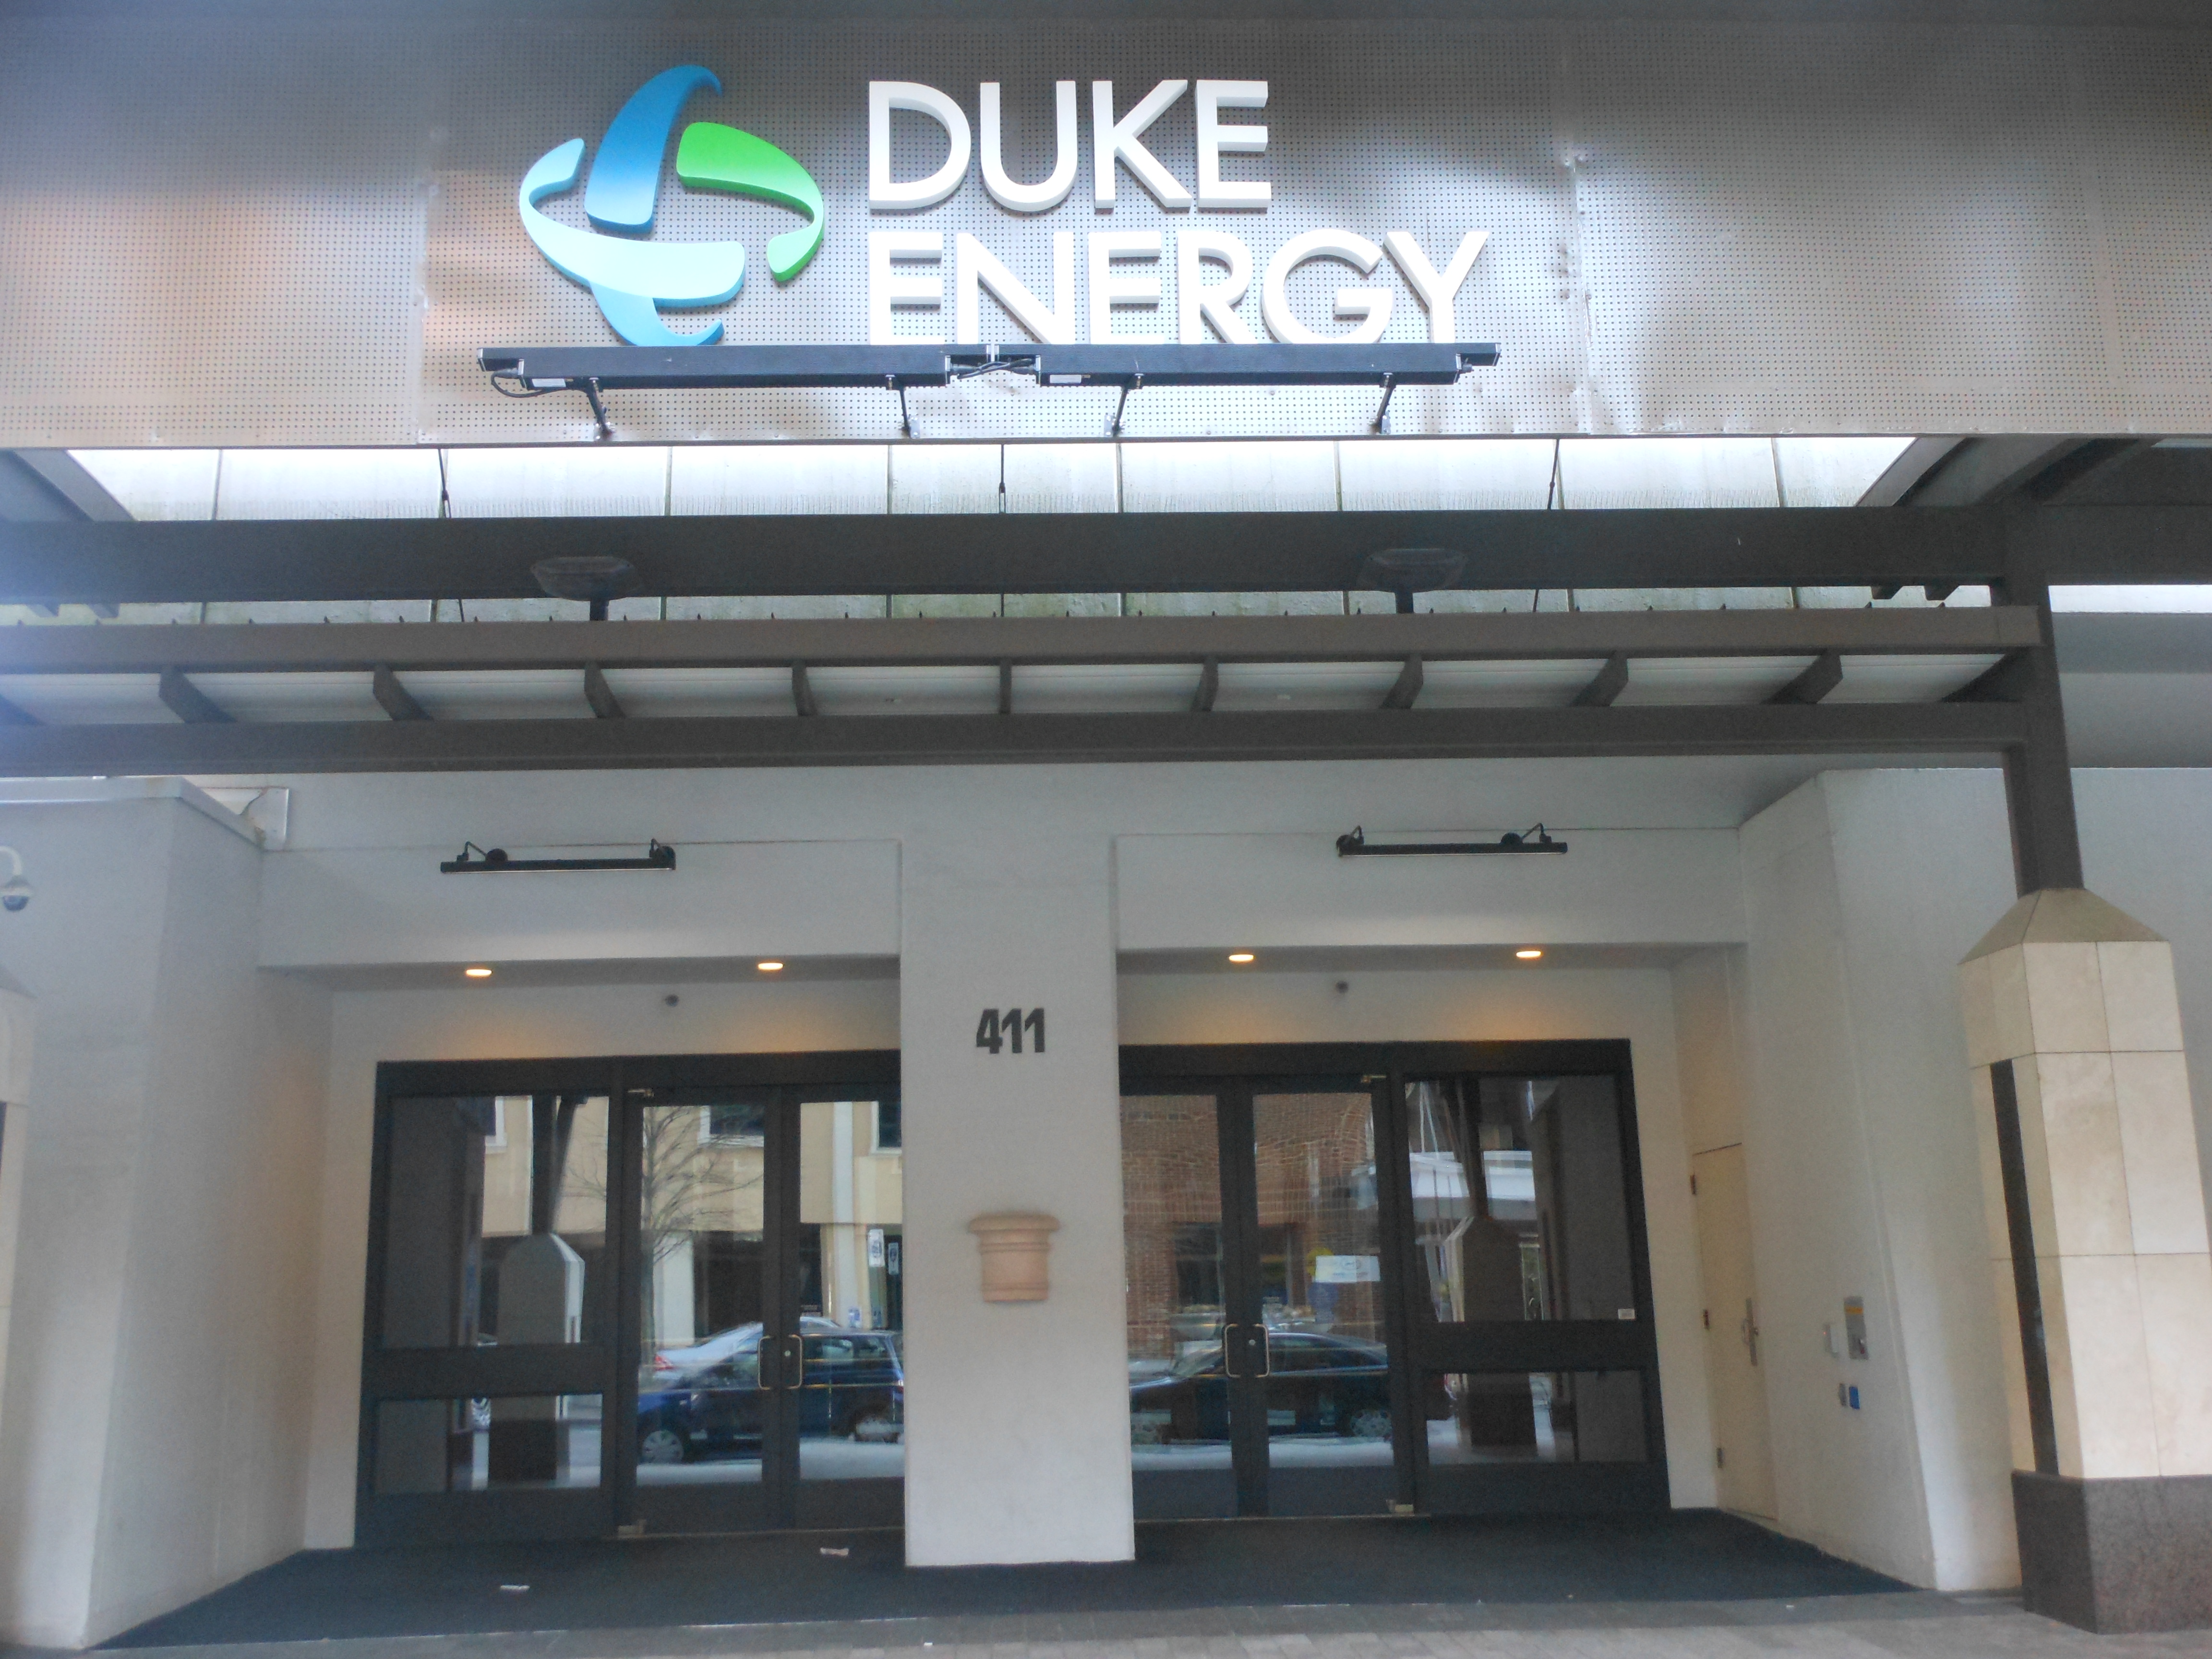 Storm Season Preparedness: Duke Energy Urges Customers to Create Emergency Kits and Stay Connected